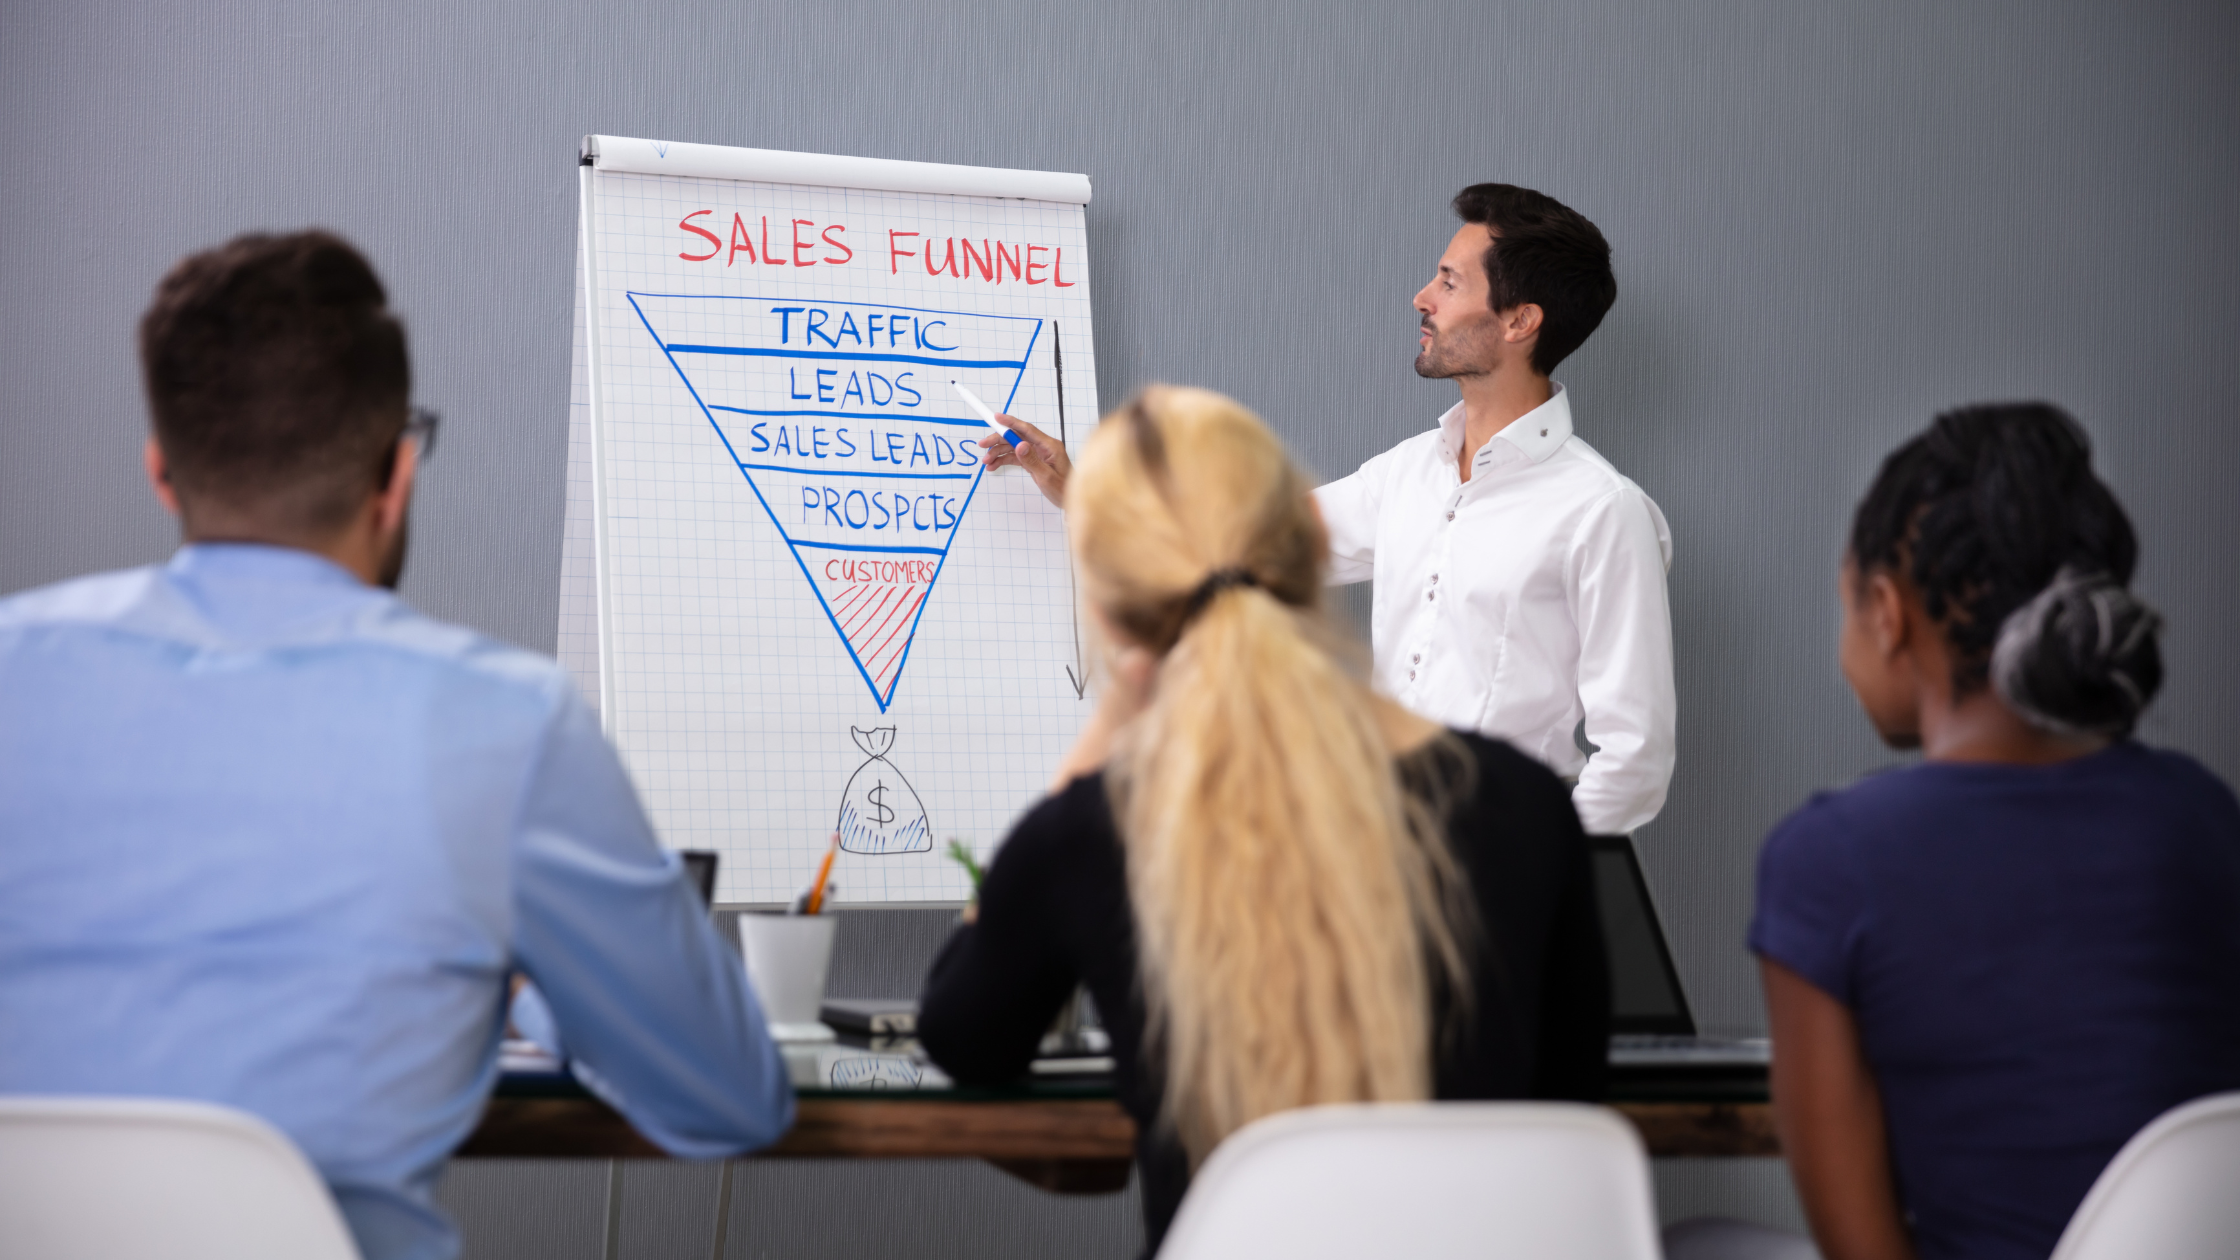 Streamlining the Sales Funnel for Maximum Conversion